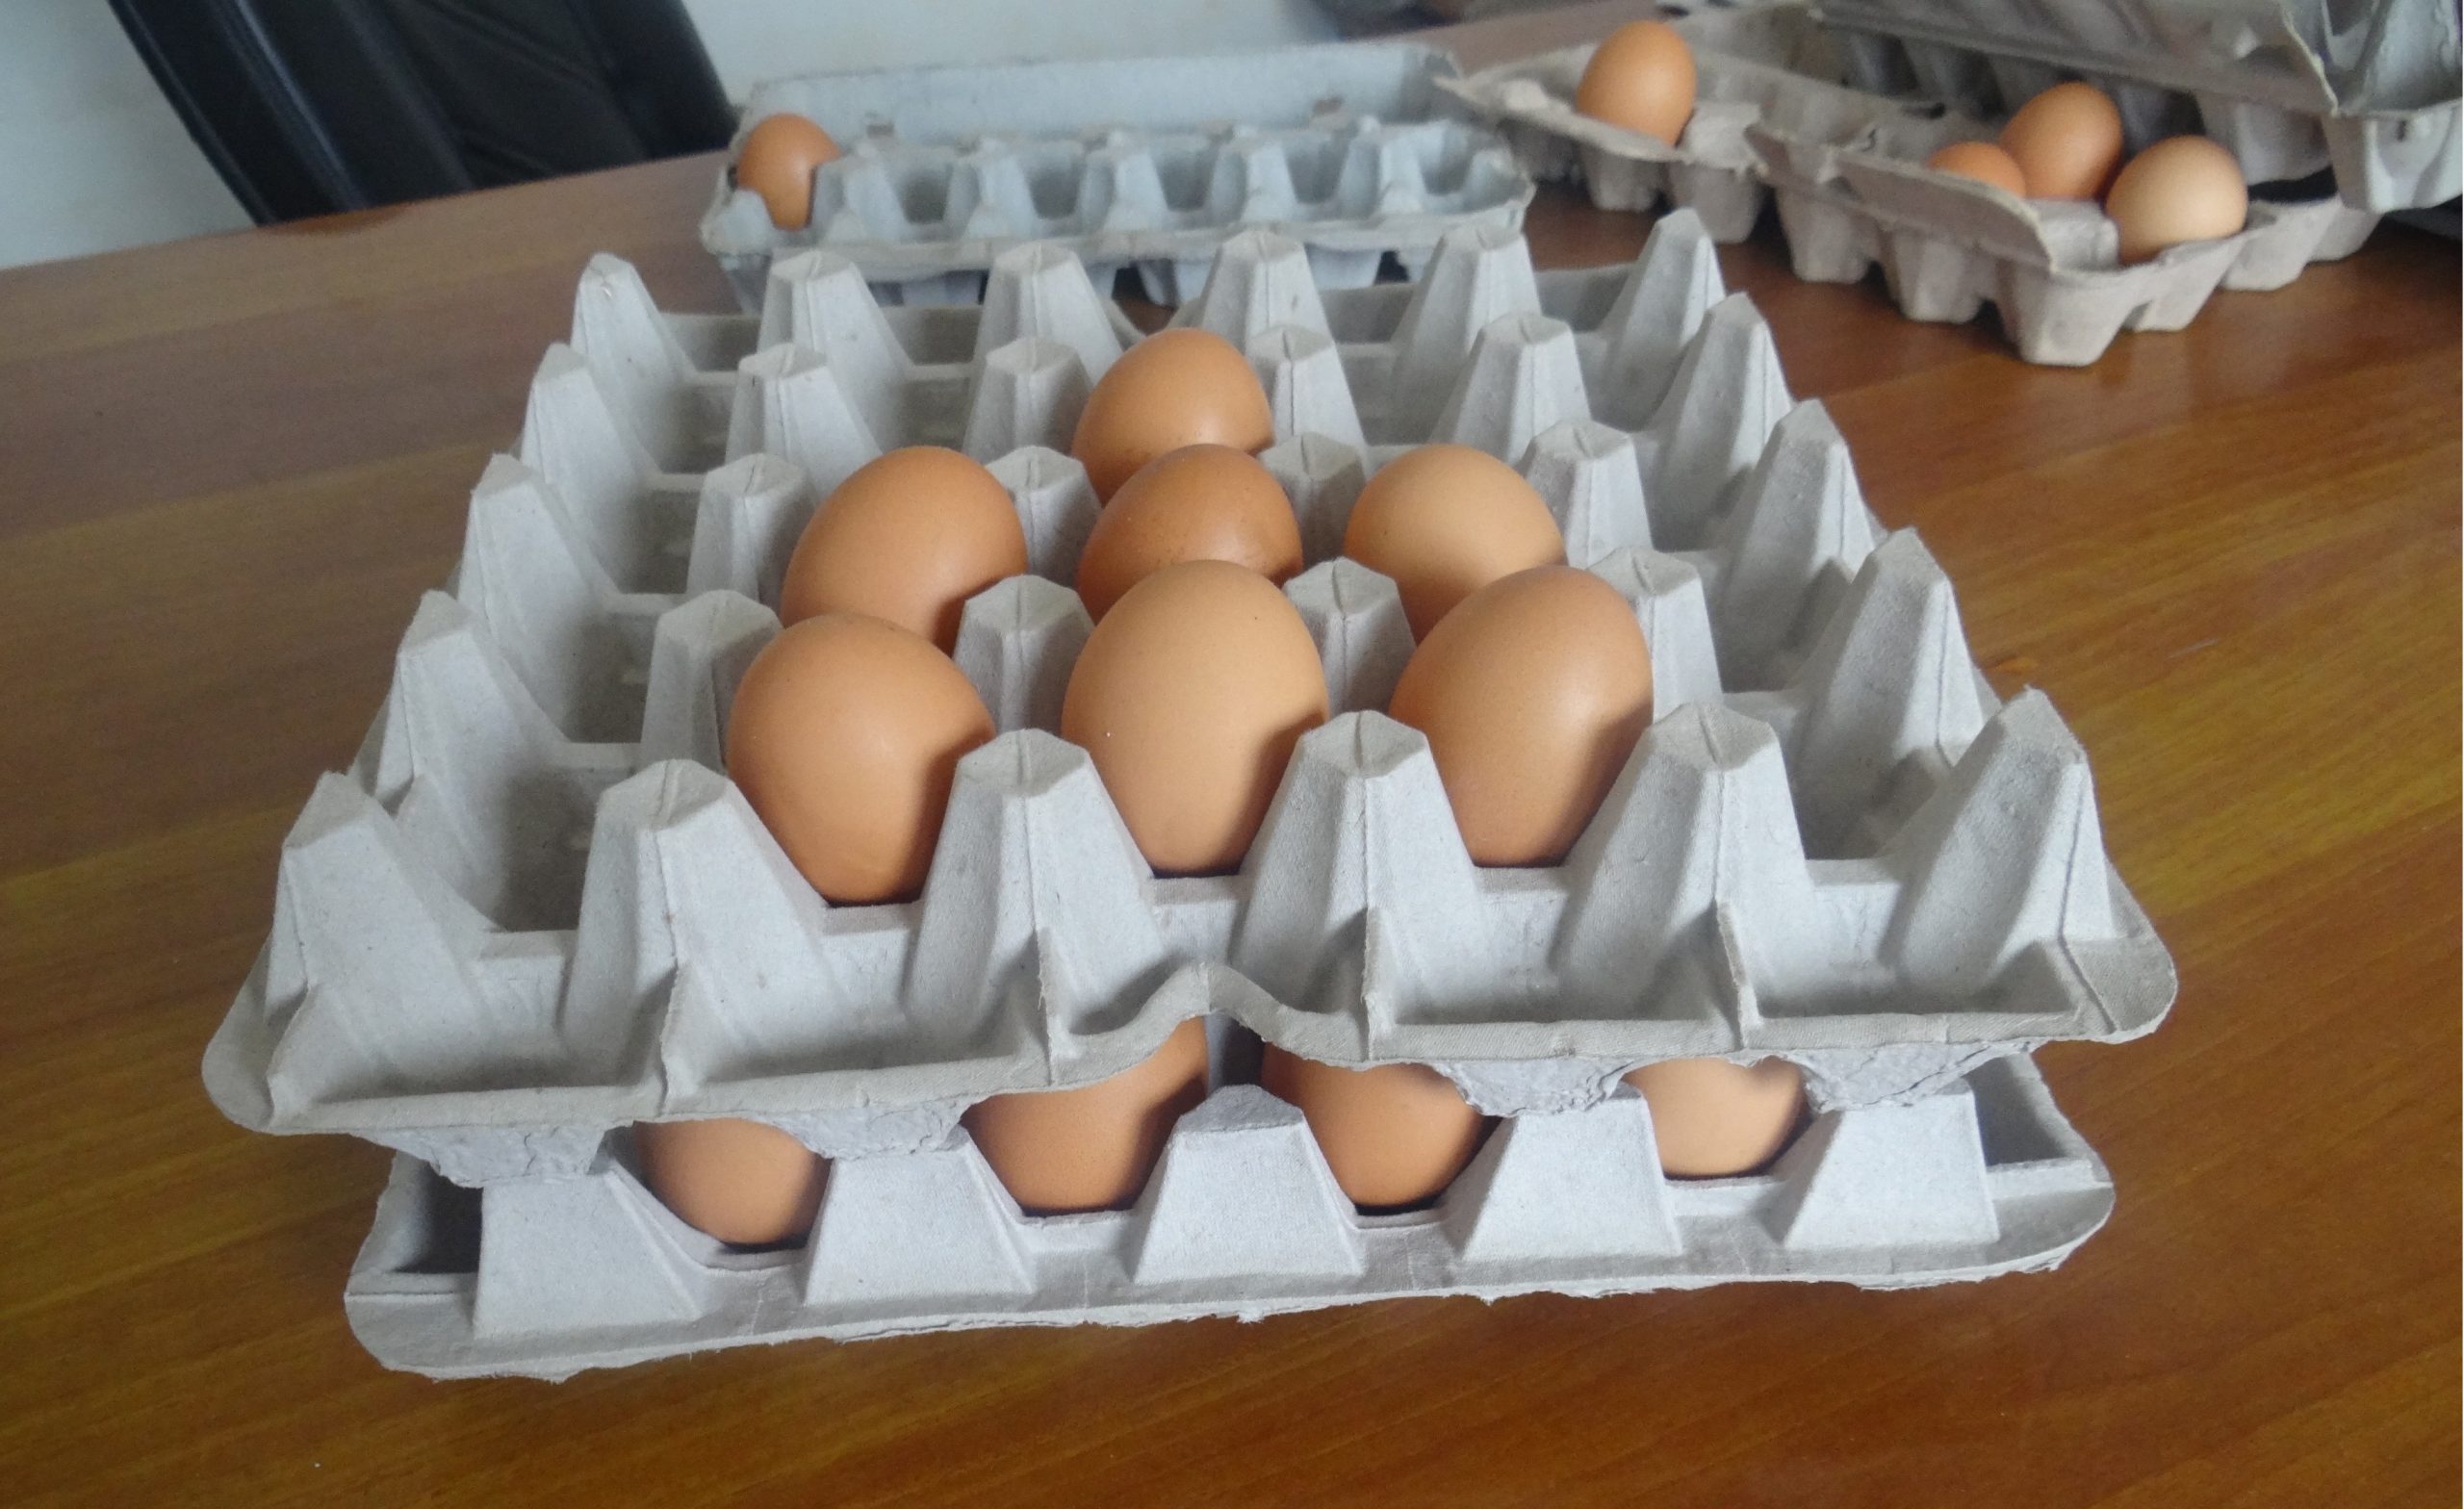 Paper Pulp Molding Machine Produces Egg Trays Quickly